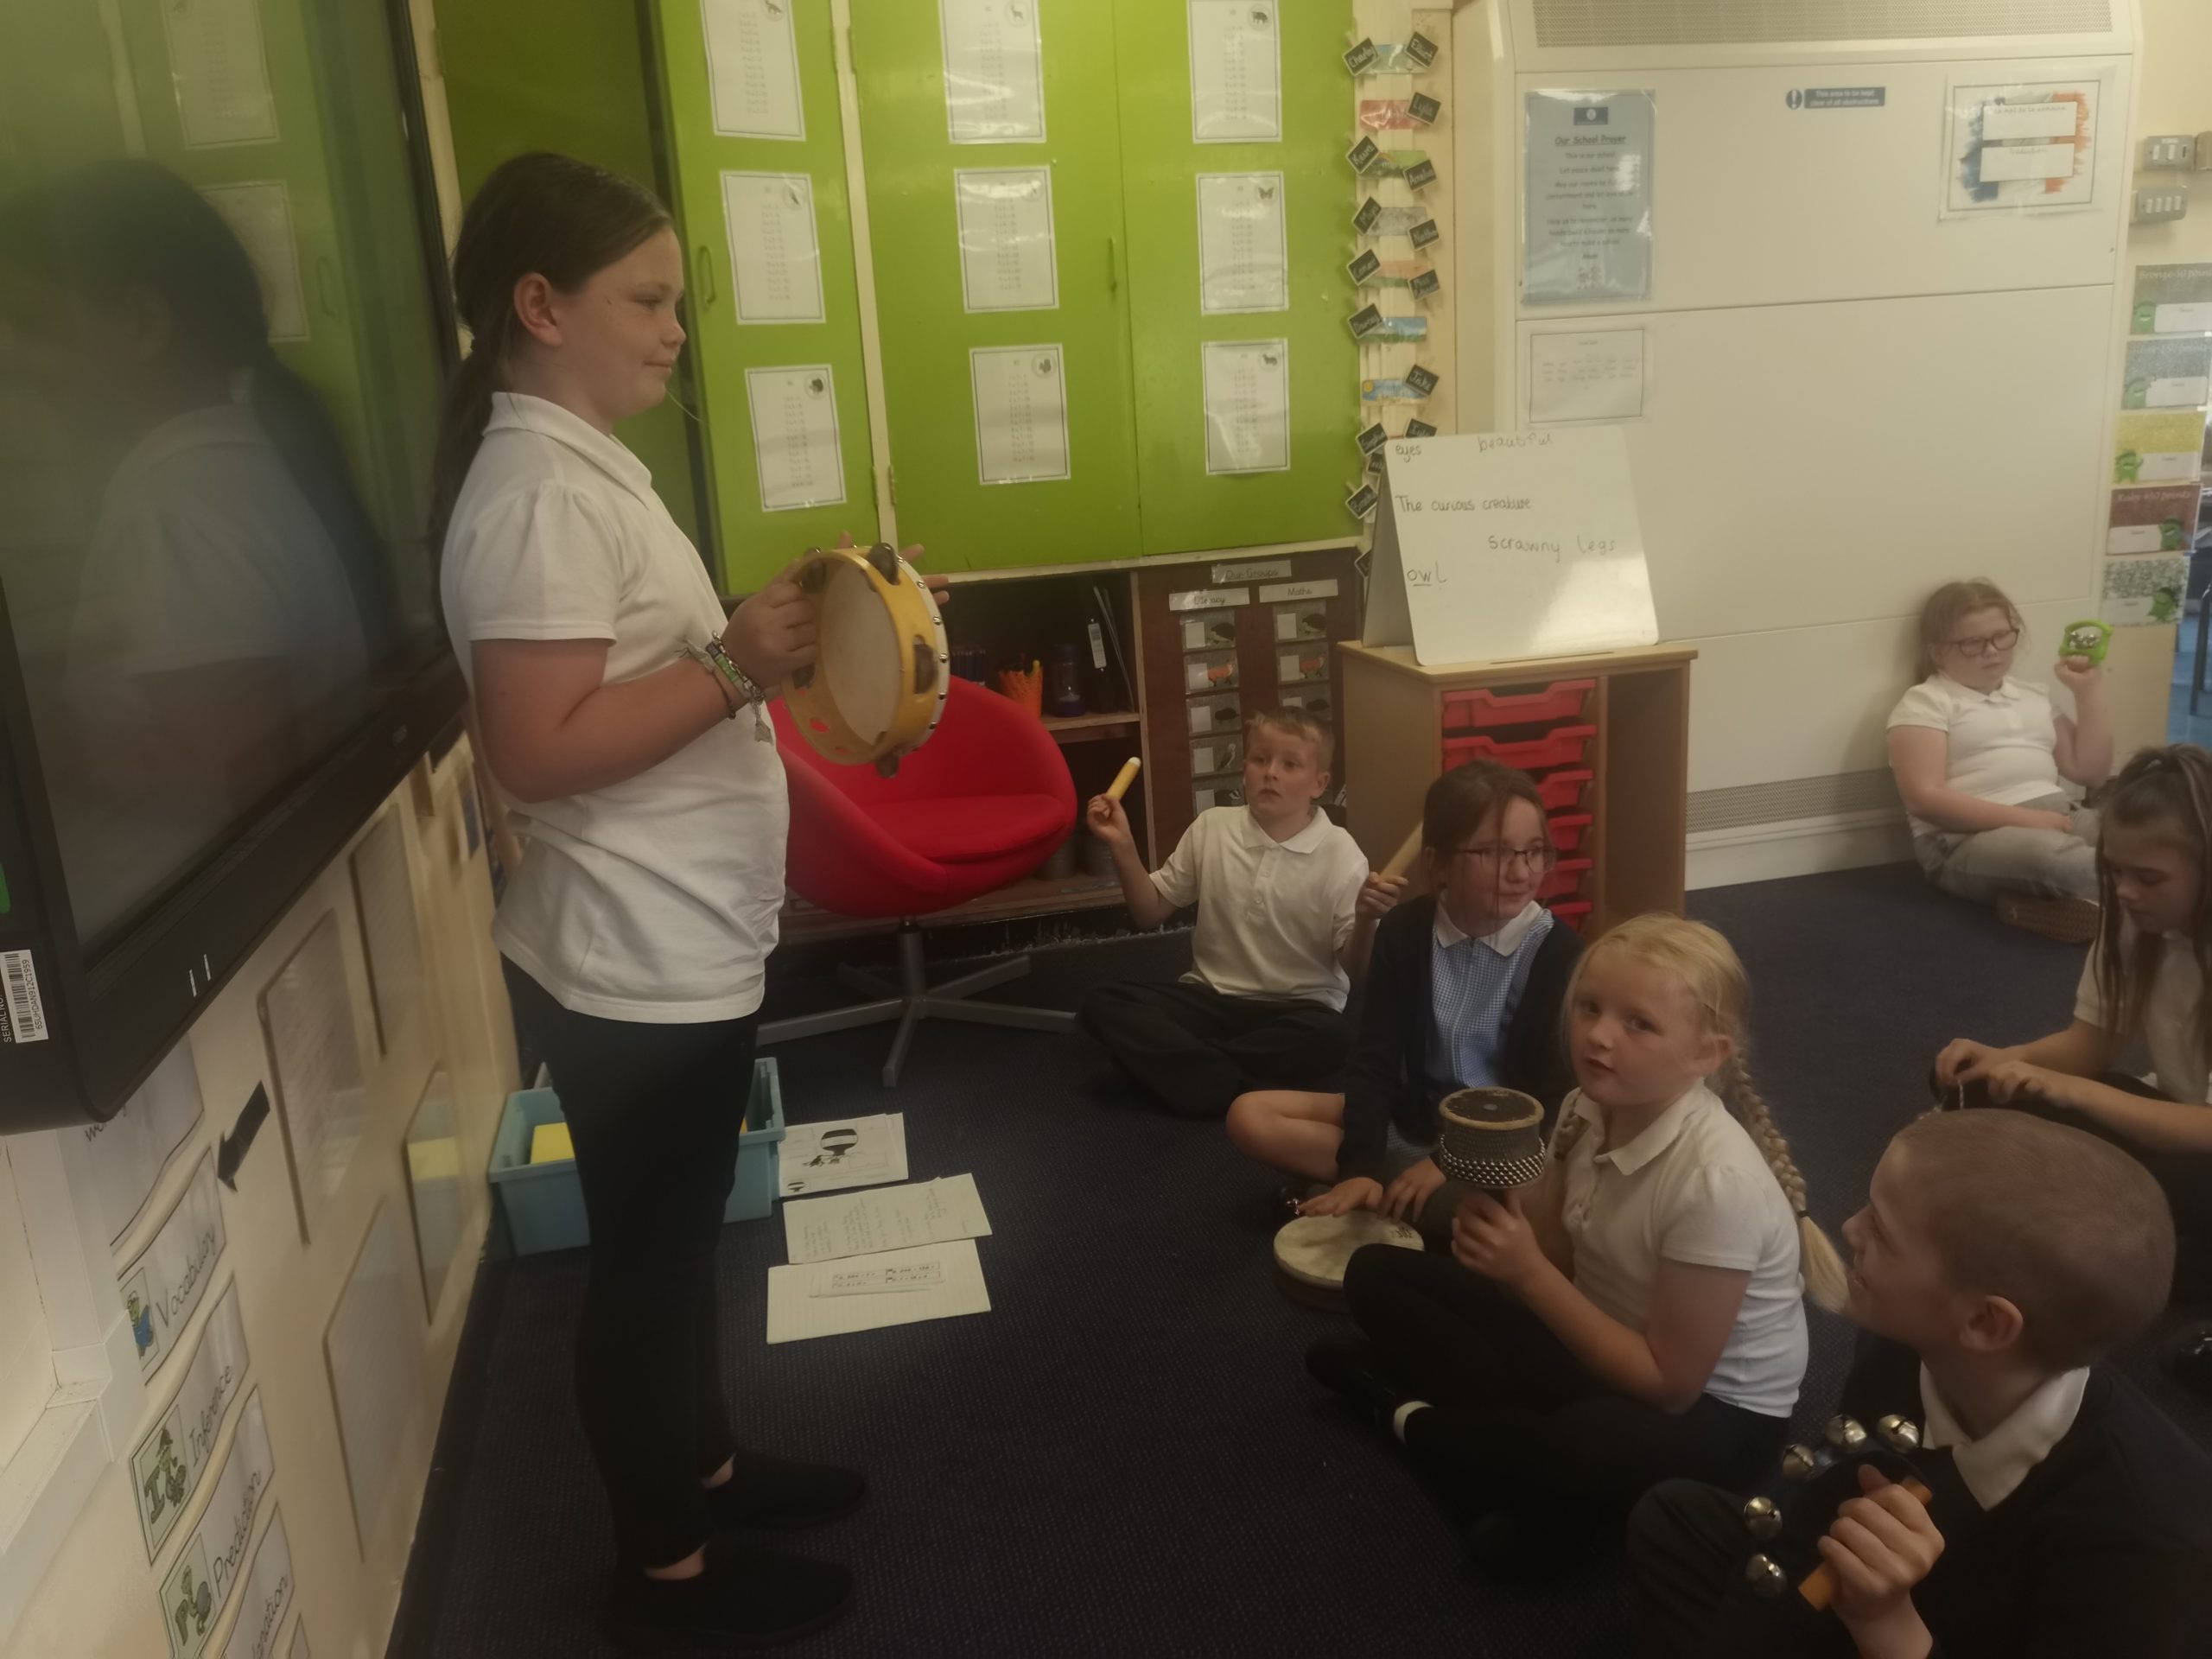 Class 10 in their music lessons this week